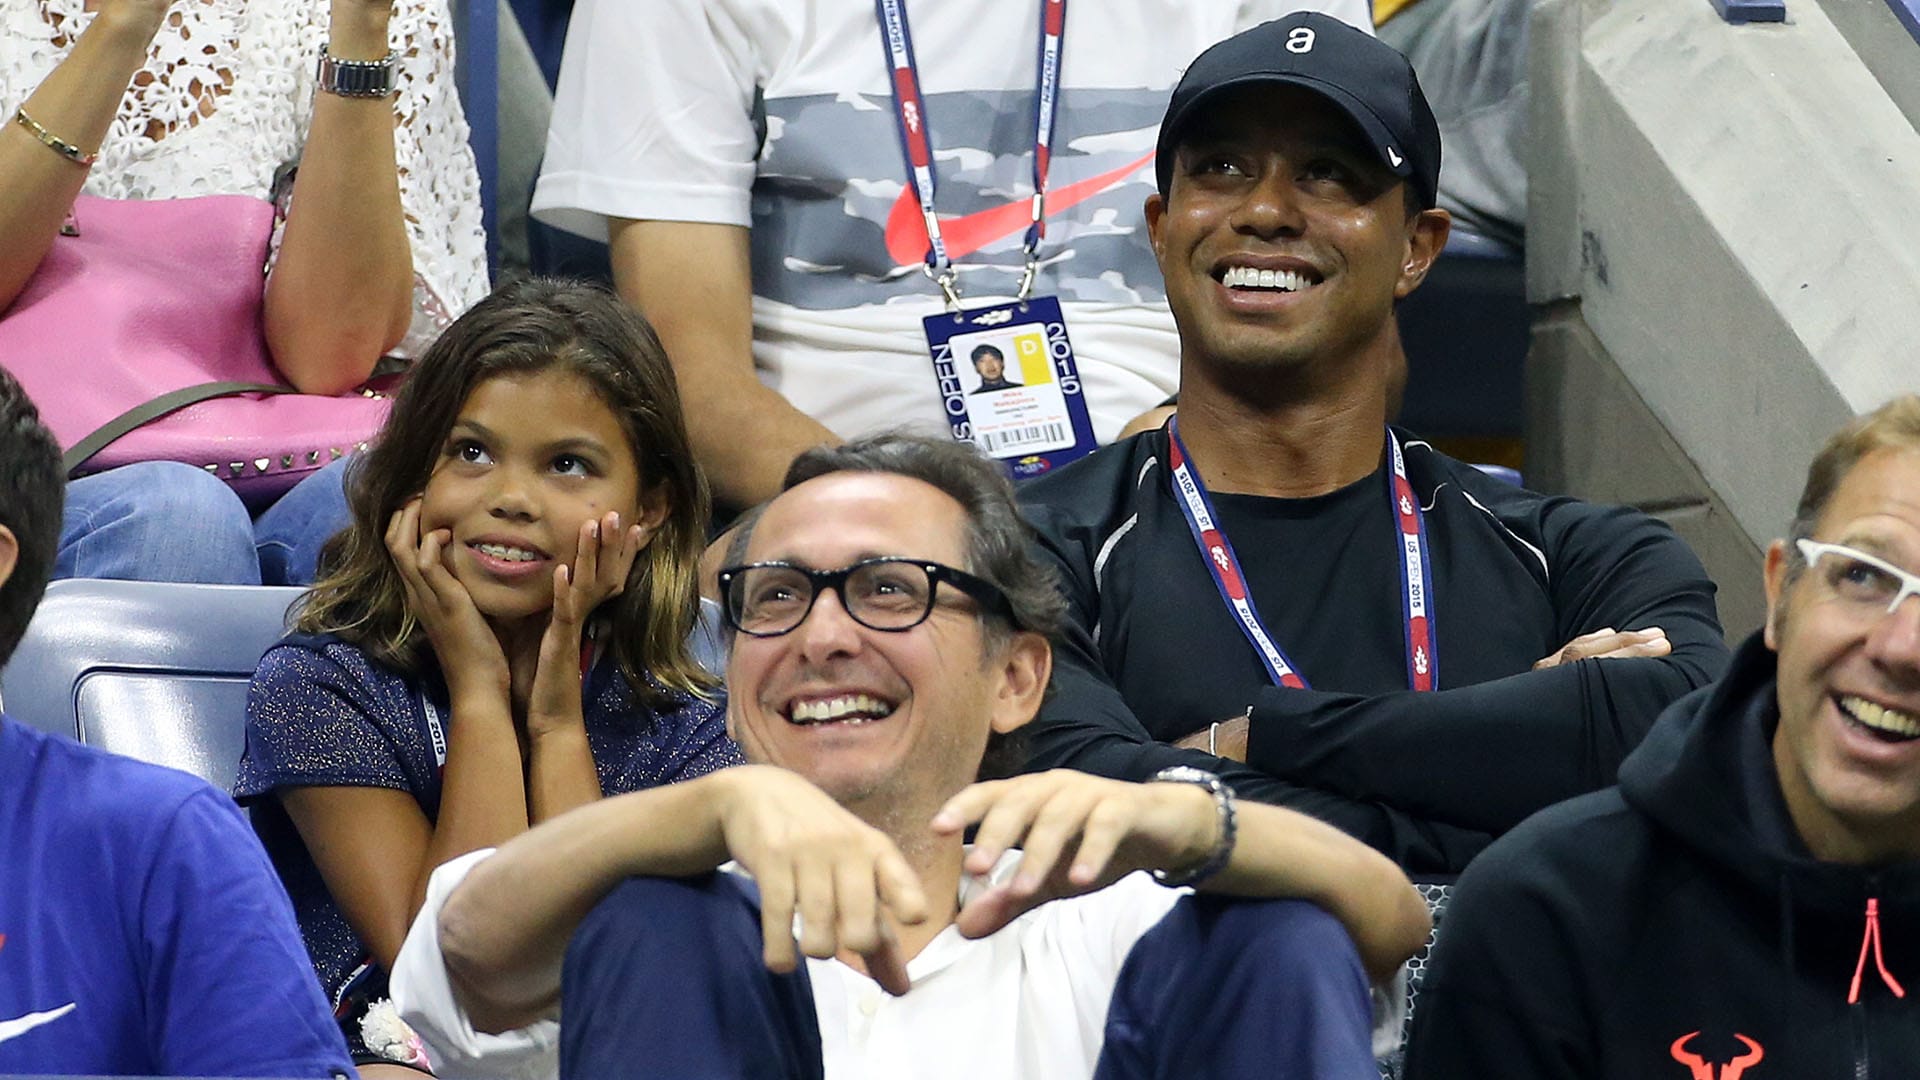 Tiger Woods’ daughter, Sam, to introduce dad at Hall of Fame ceremony